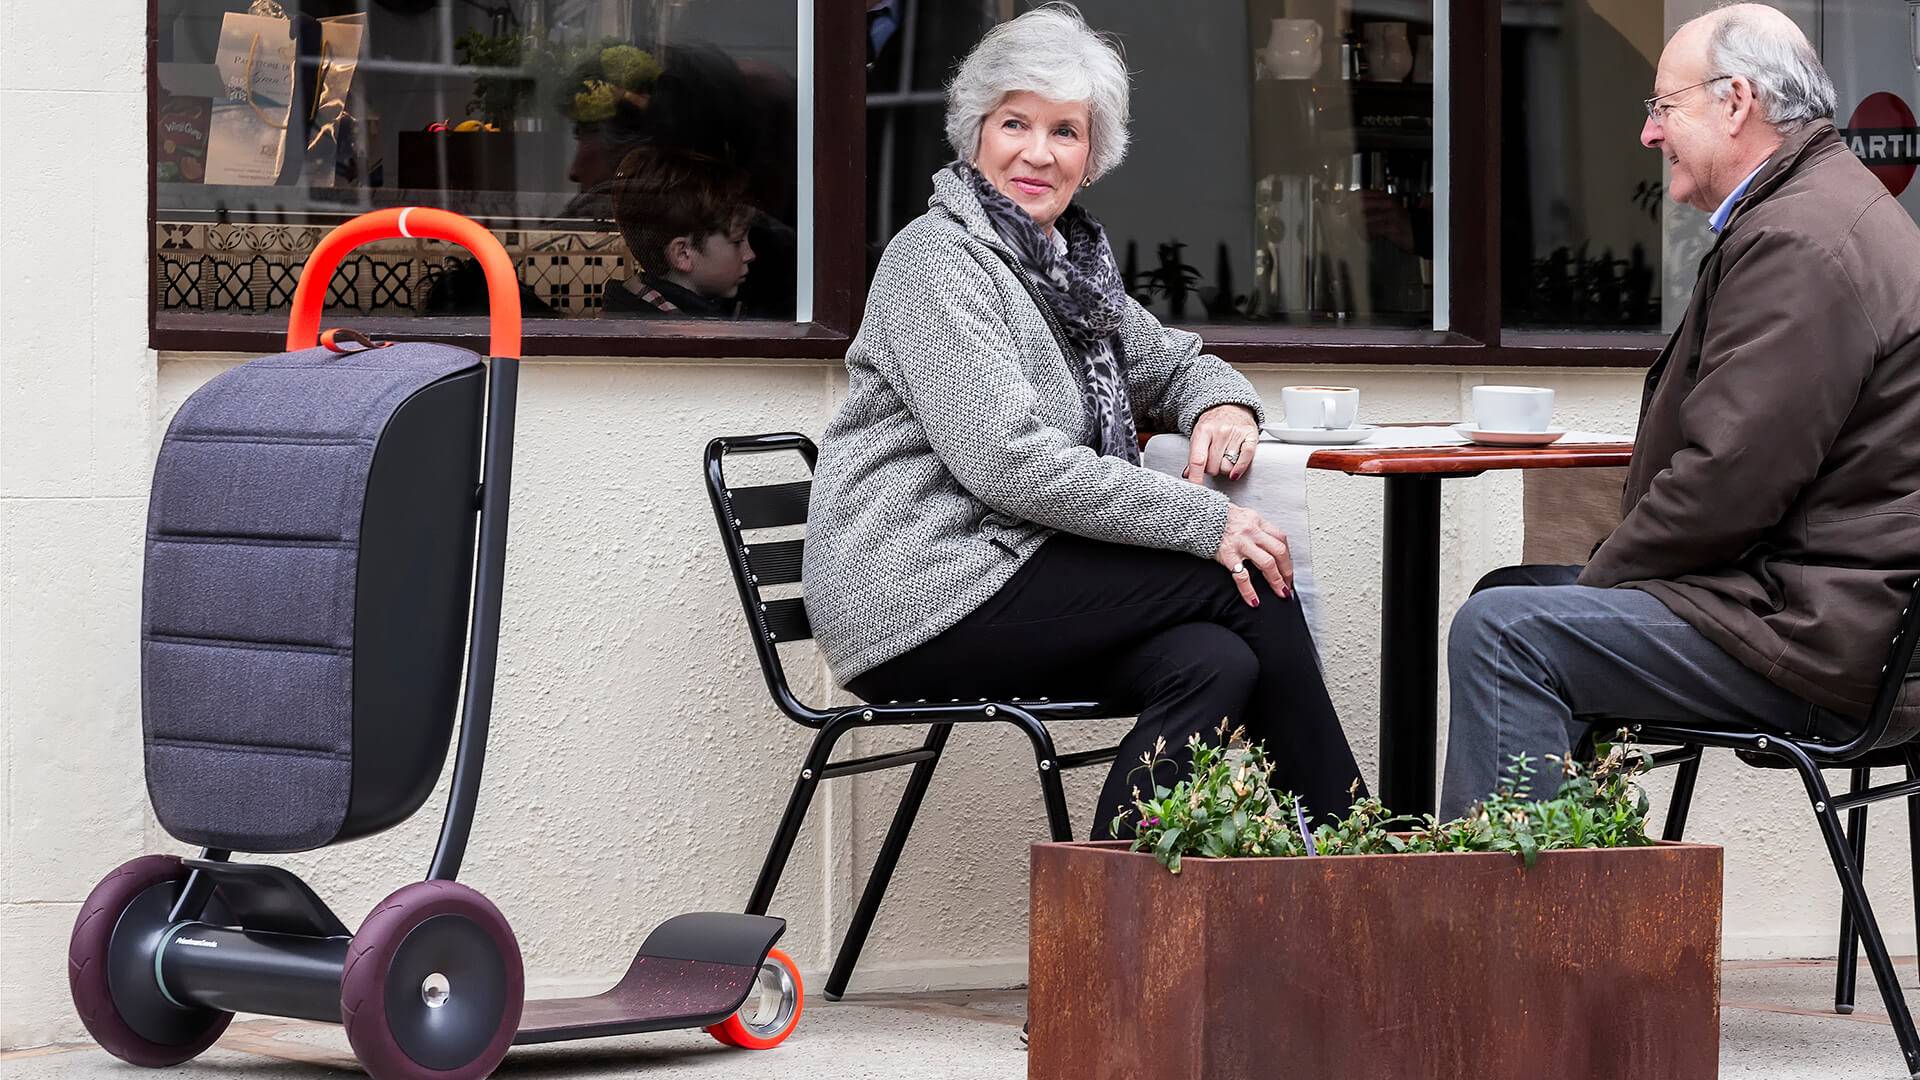 An older couple sit at an outdoor table in a cafe, with a three-wheeled personal scooter next to the woman